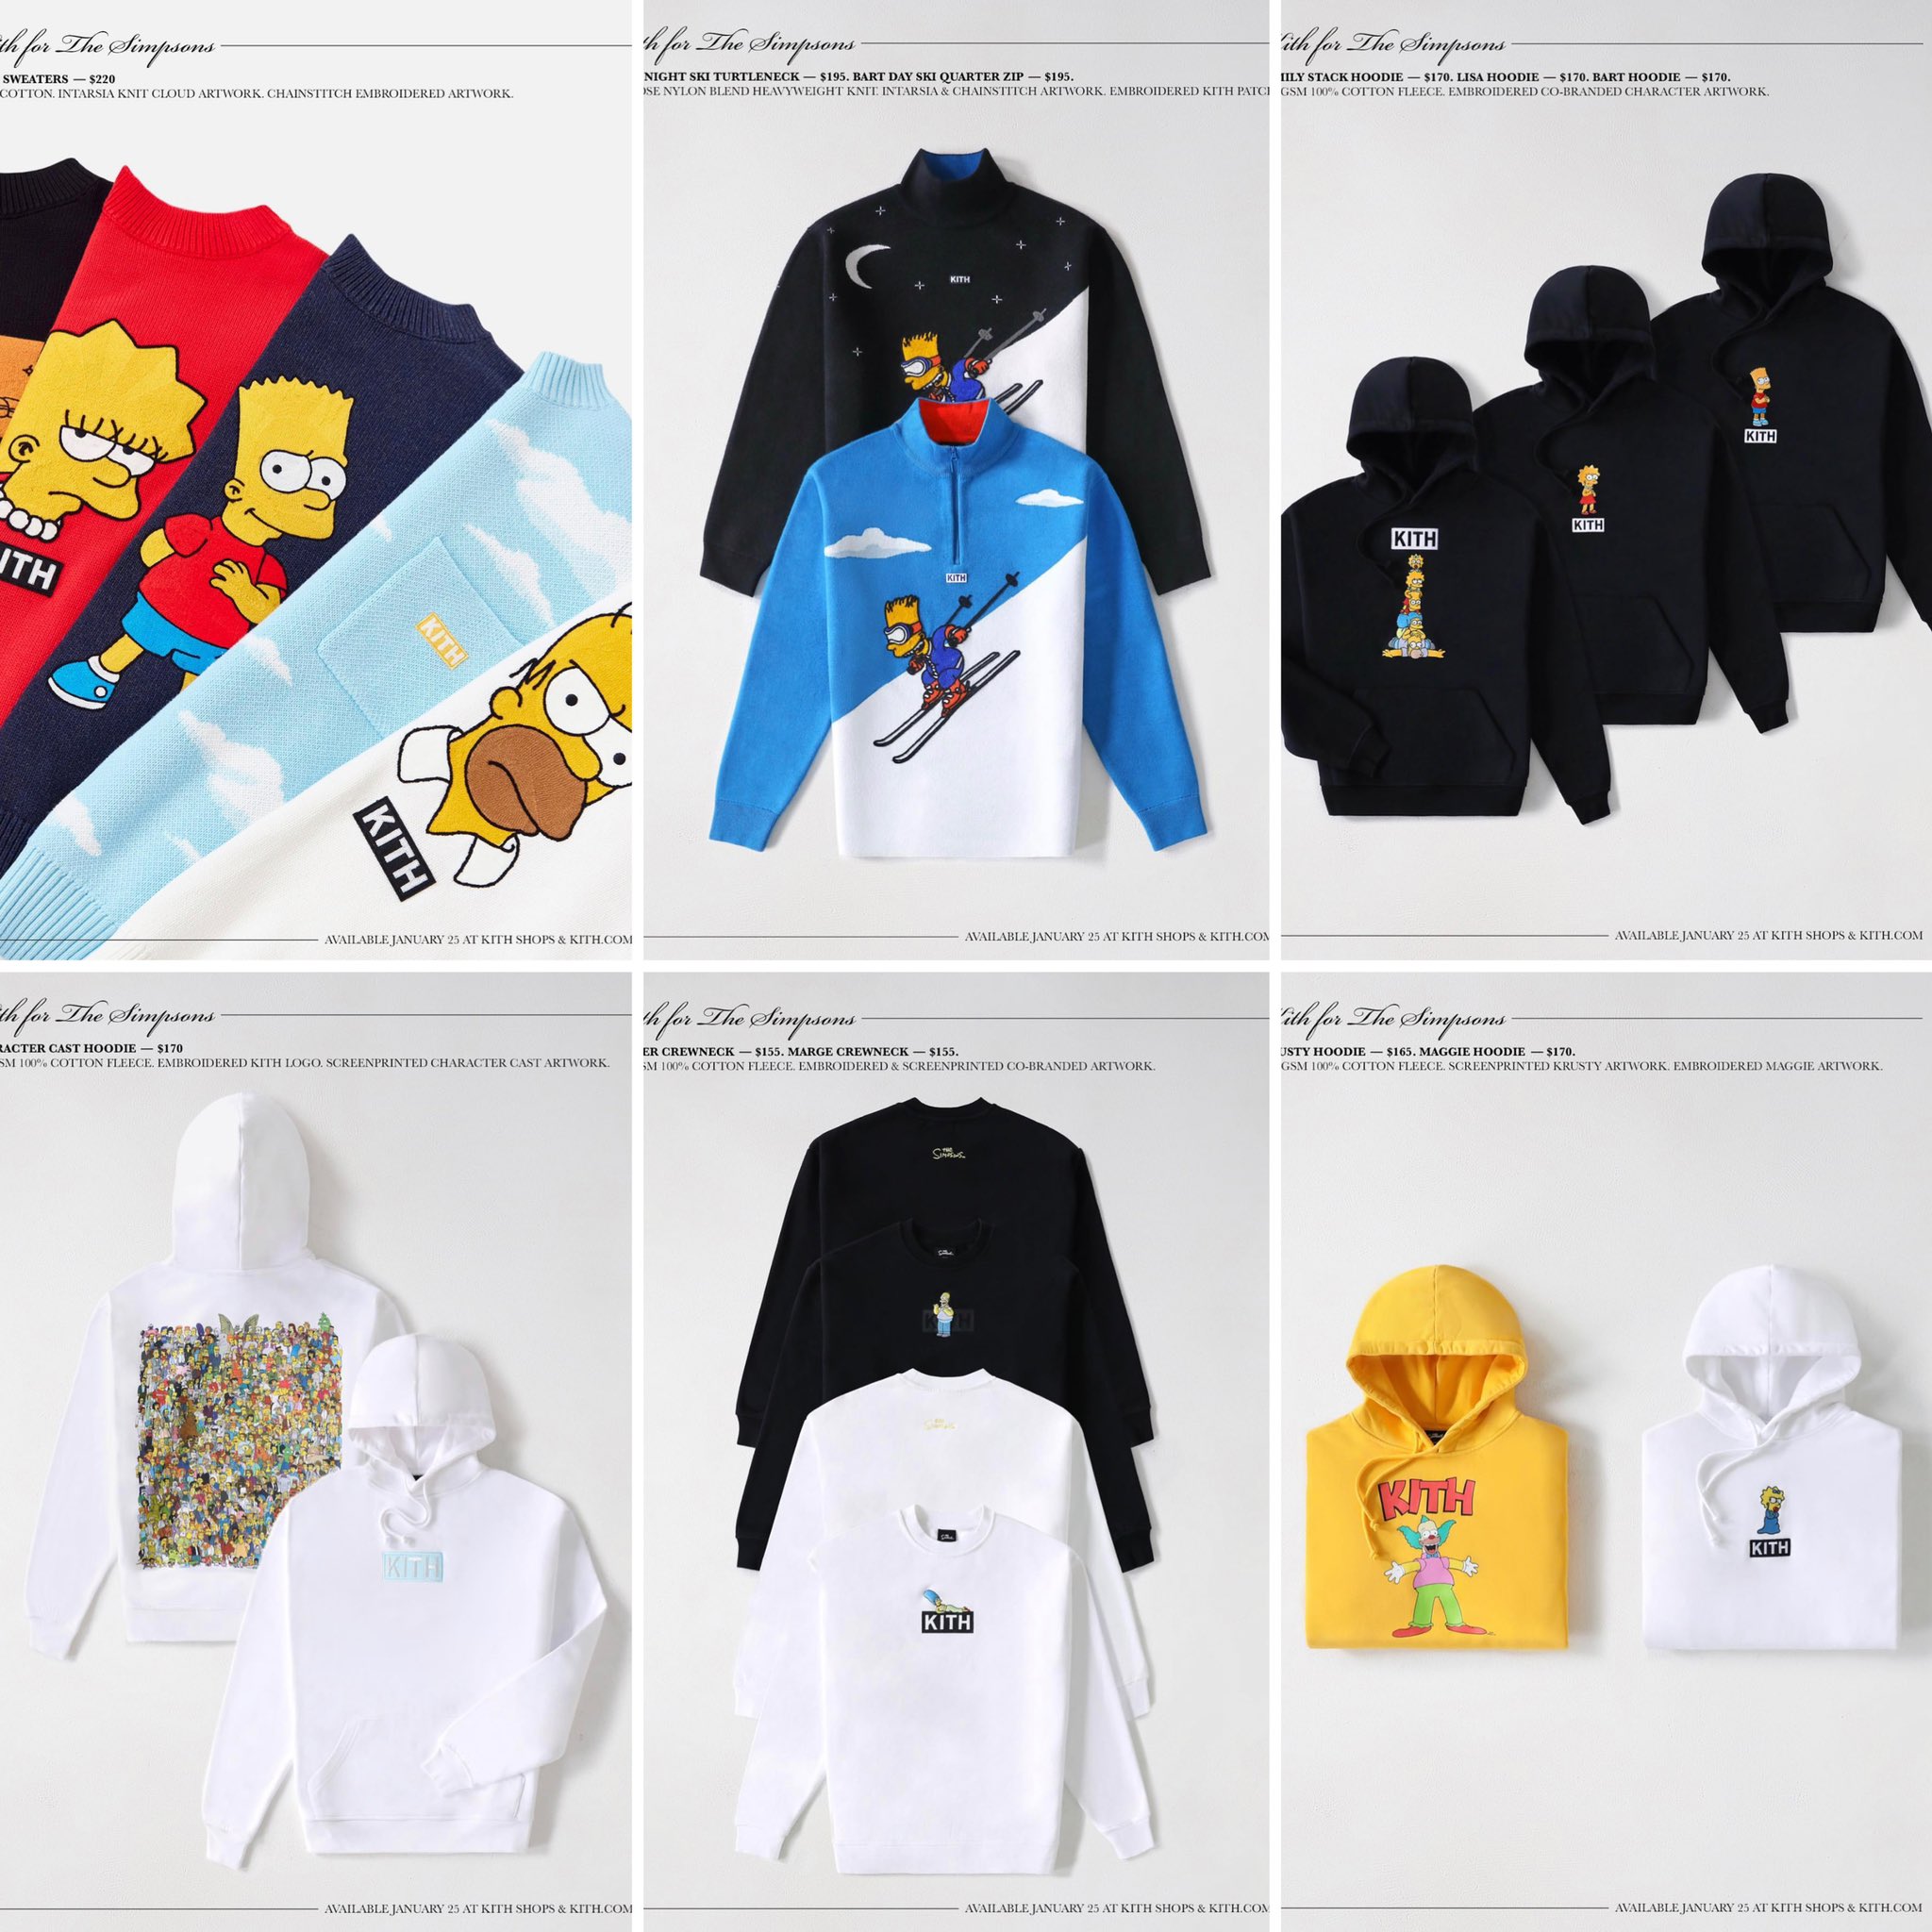 KITH SIMPSONS CHARACTER CAST HOODIE